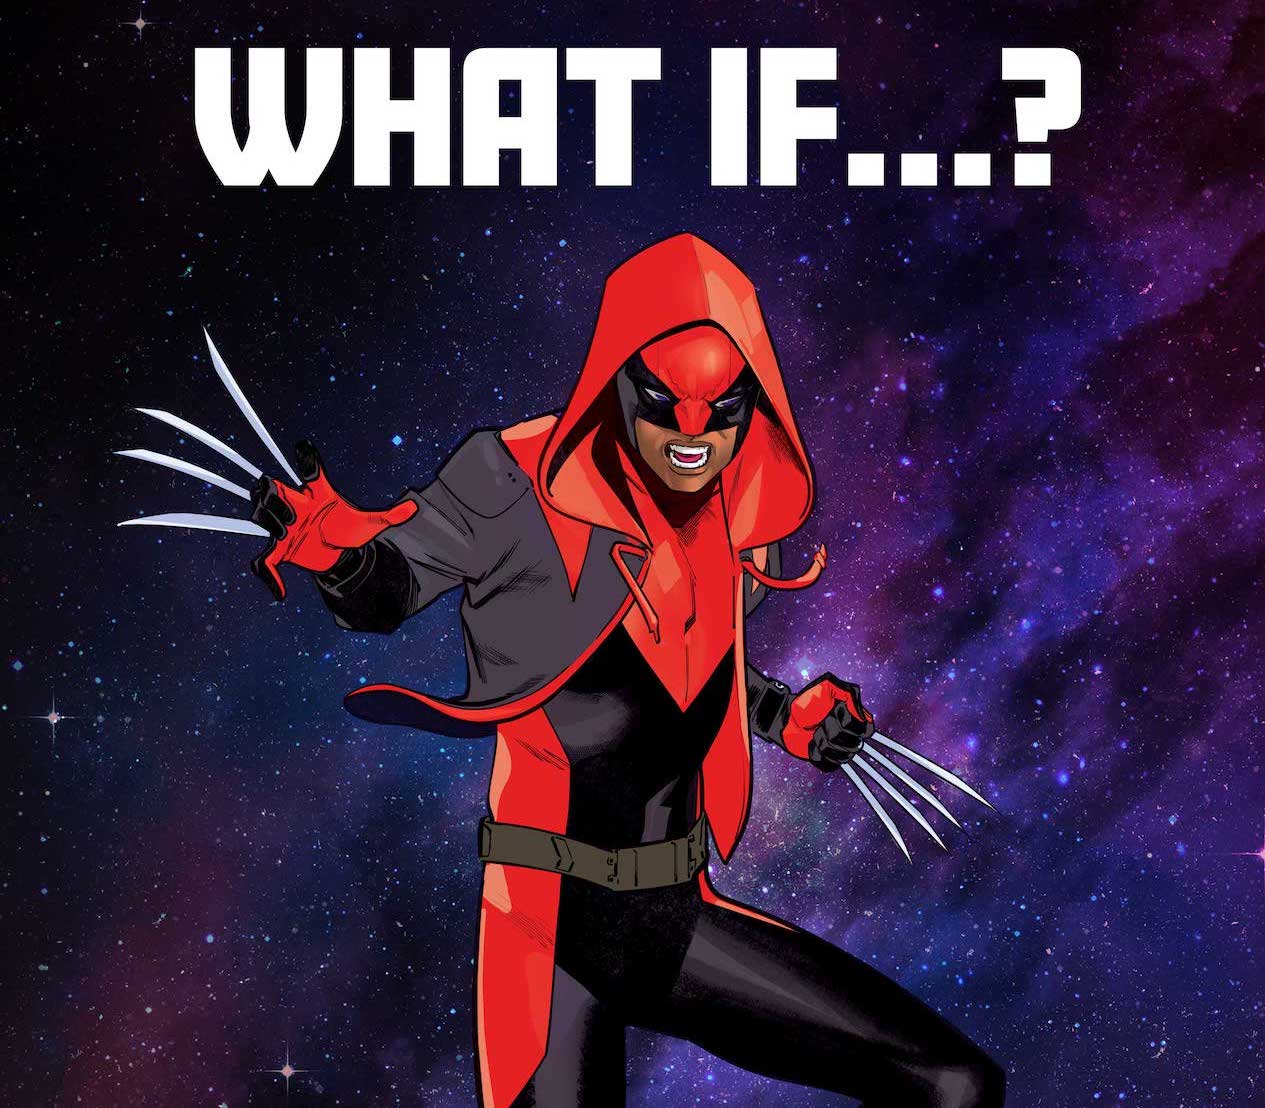 Marvel teases new 'What If...?' for March 2022